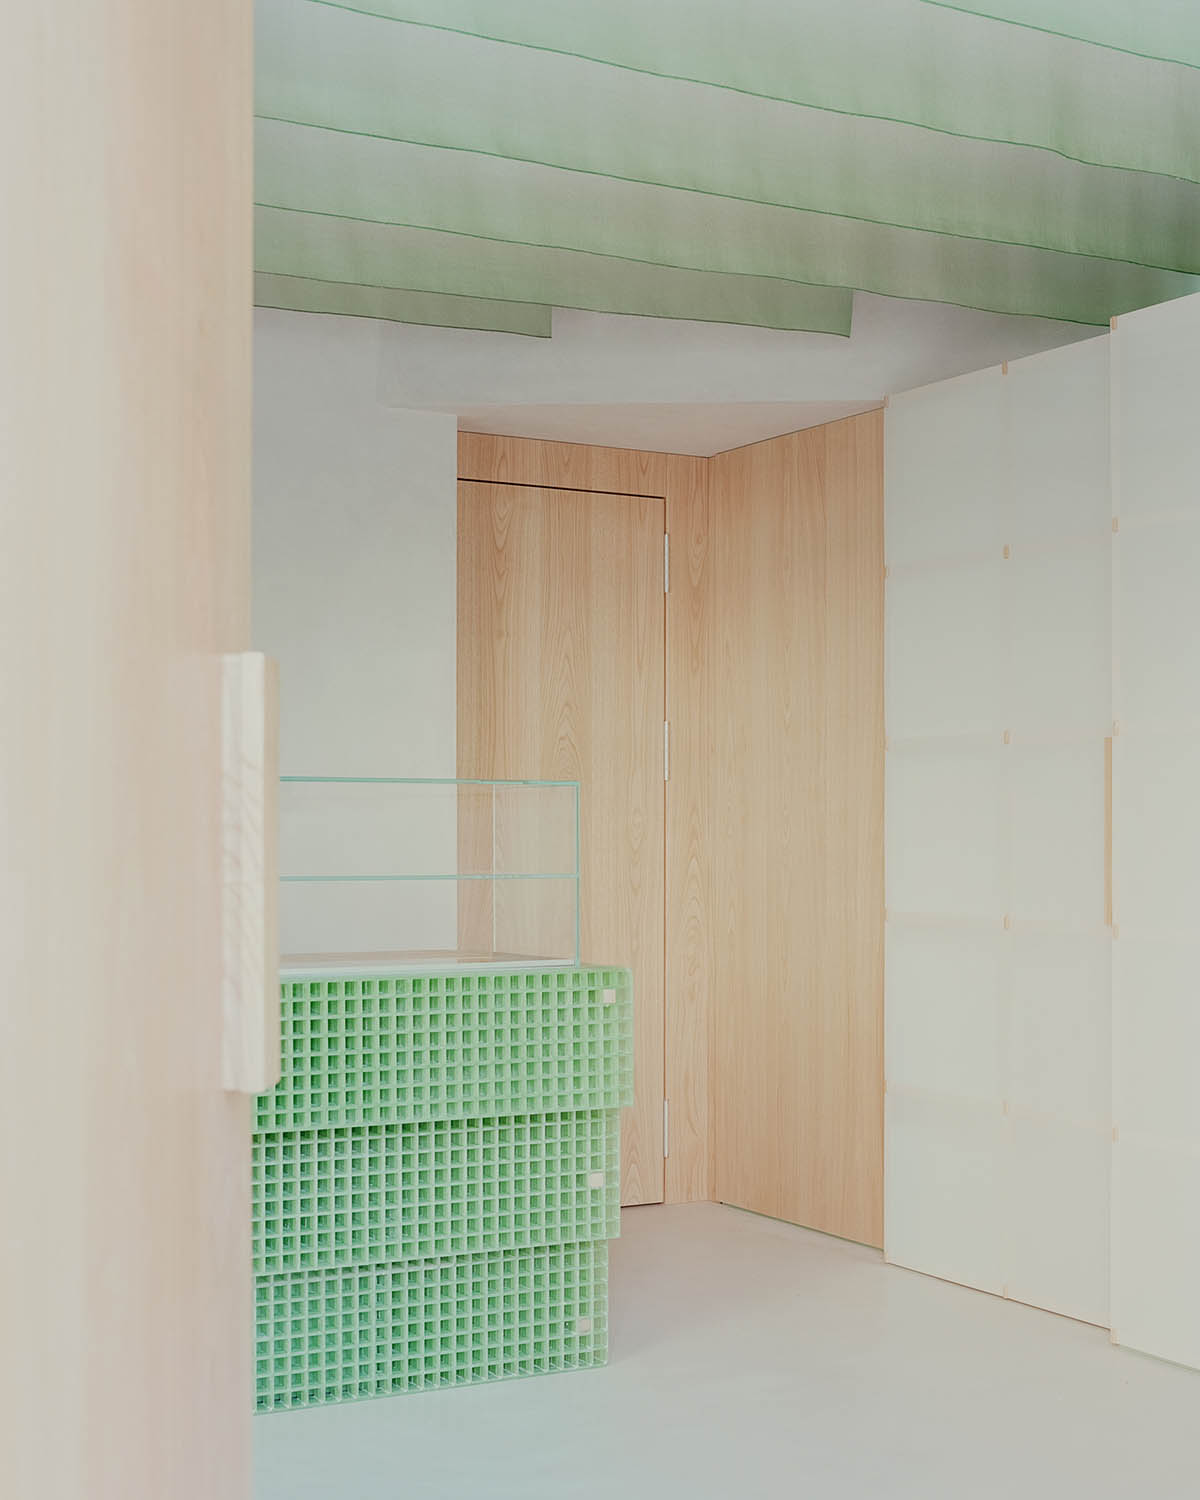 studio wok adds soft green tones and powder colors to interiors of a bakery in Milan 